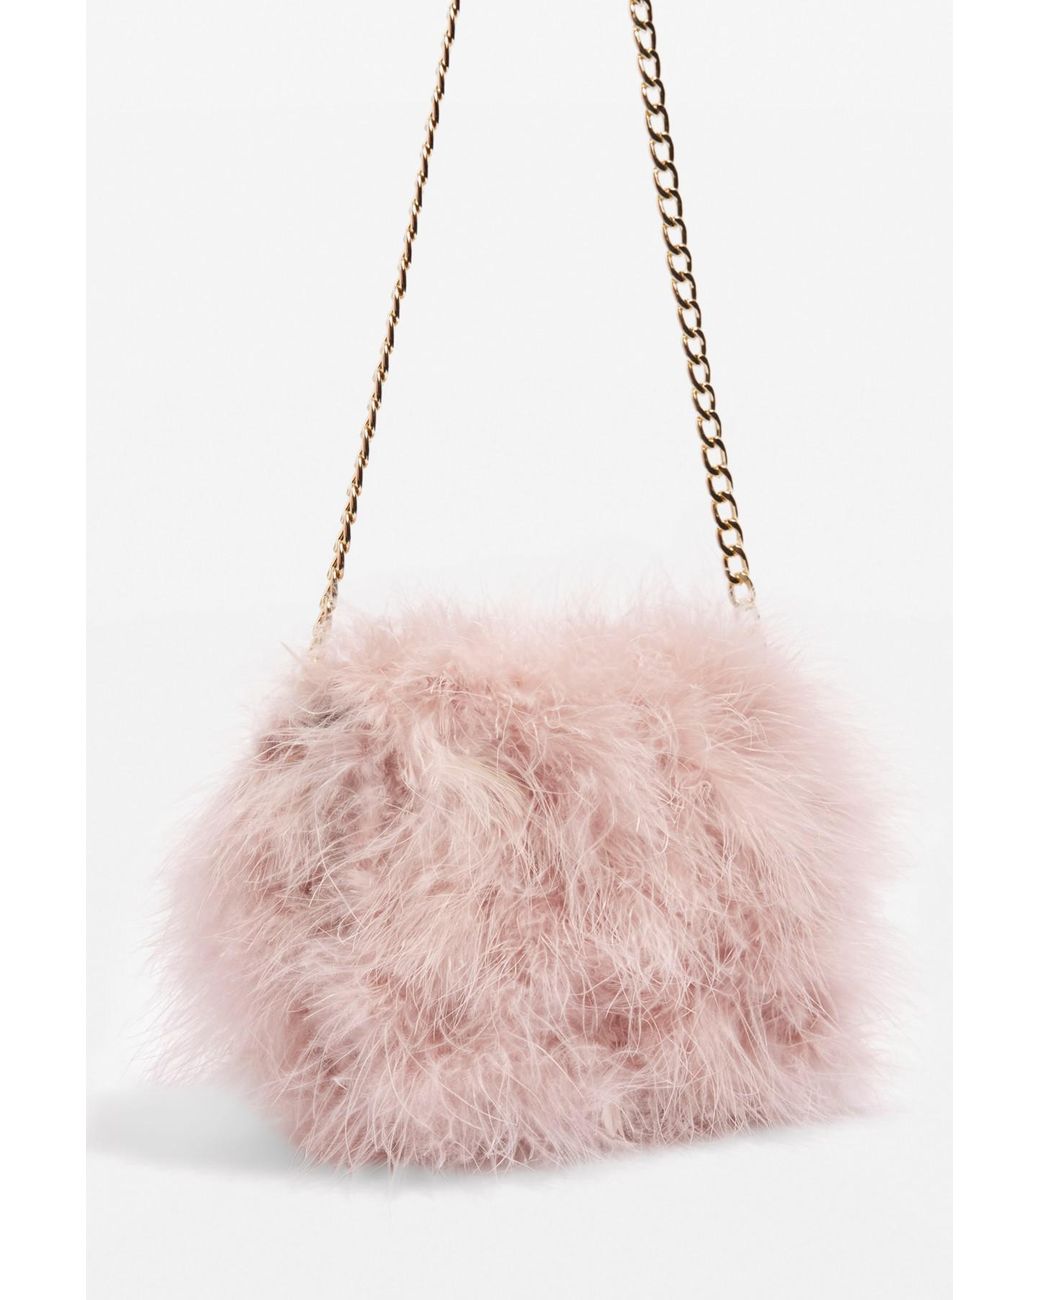 Topshop Frosty Black Feather Grab Bag